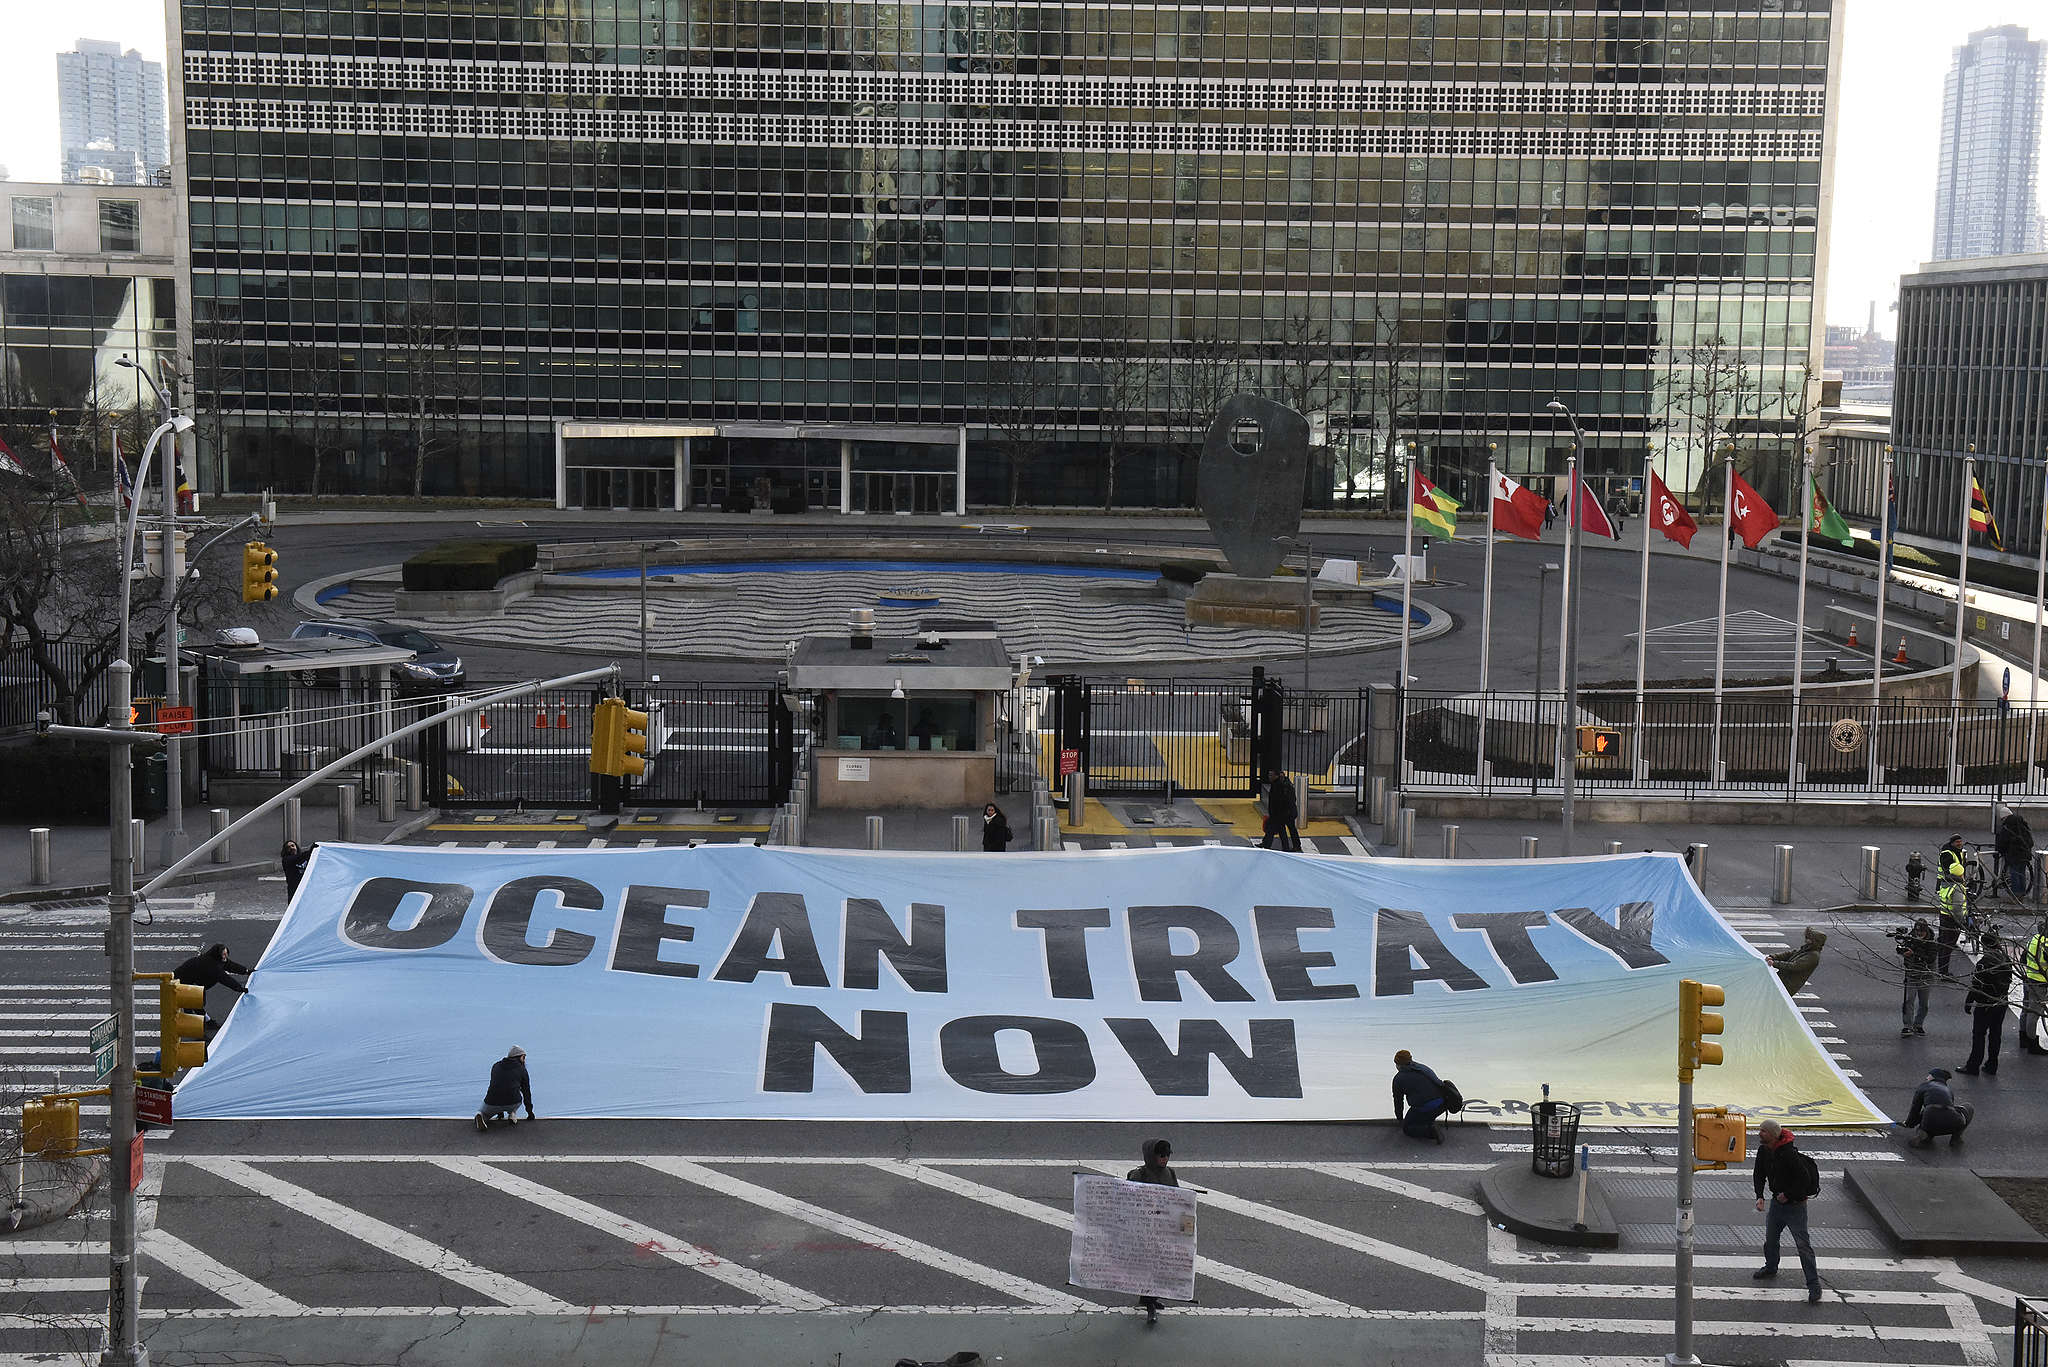 Greenpeace USA activists unfurl a giant banner reading ‘ Ocean Treaty Now!’ To send a clear message to delegates at the United Nations in New York at the start of the second week of the resumed IGC5 negotiations. © Stephanie Keith / Greenpeace